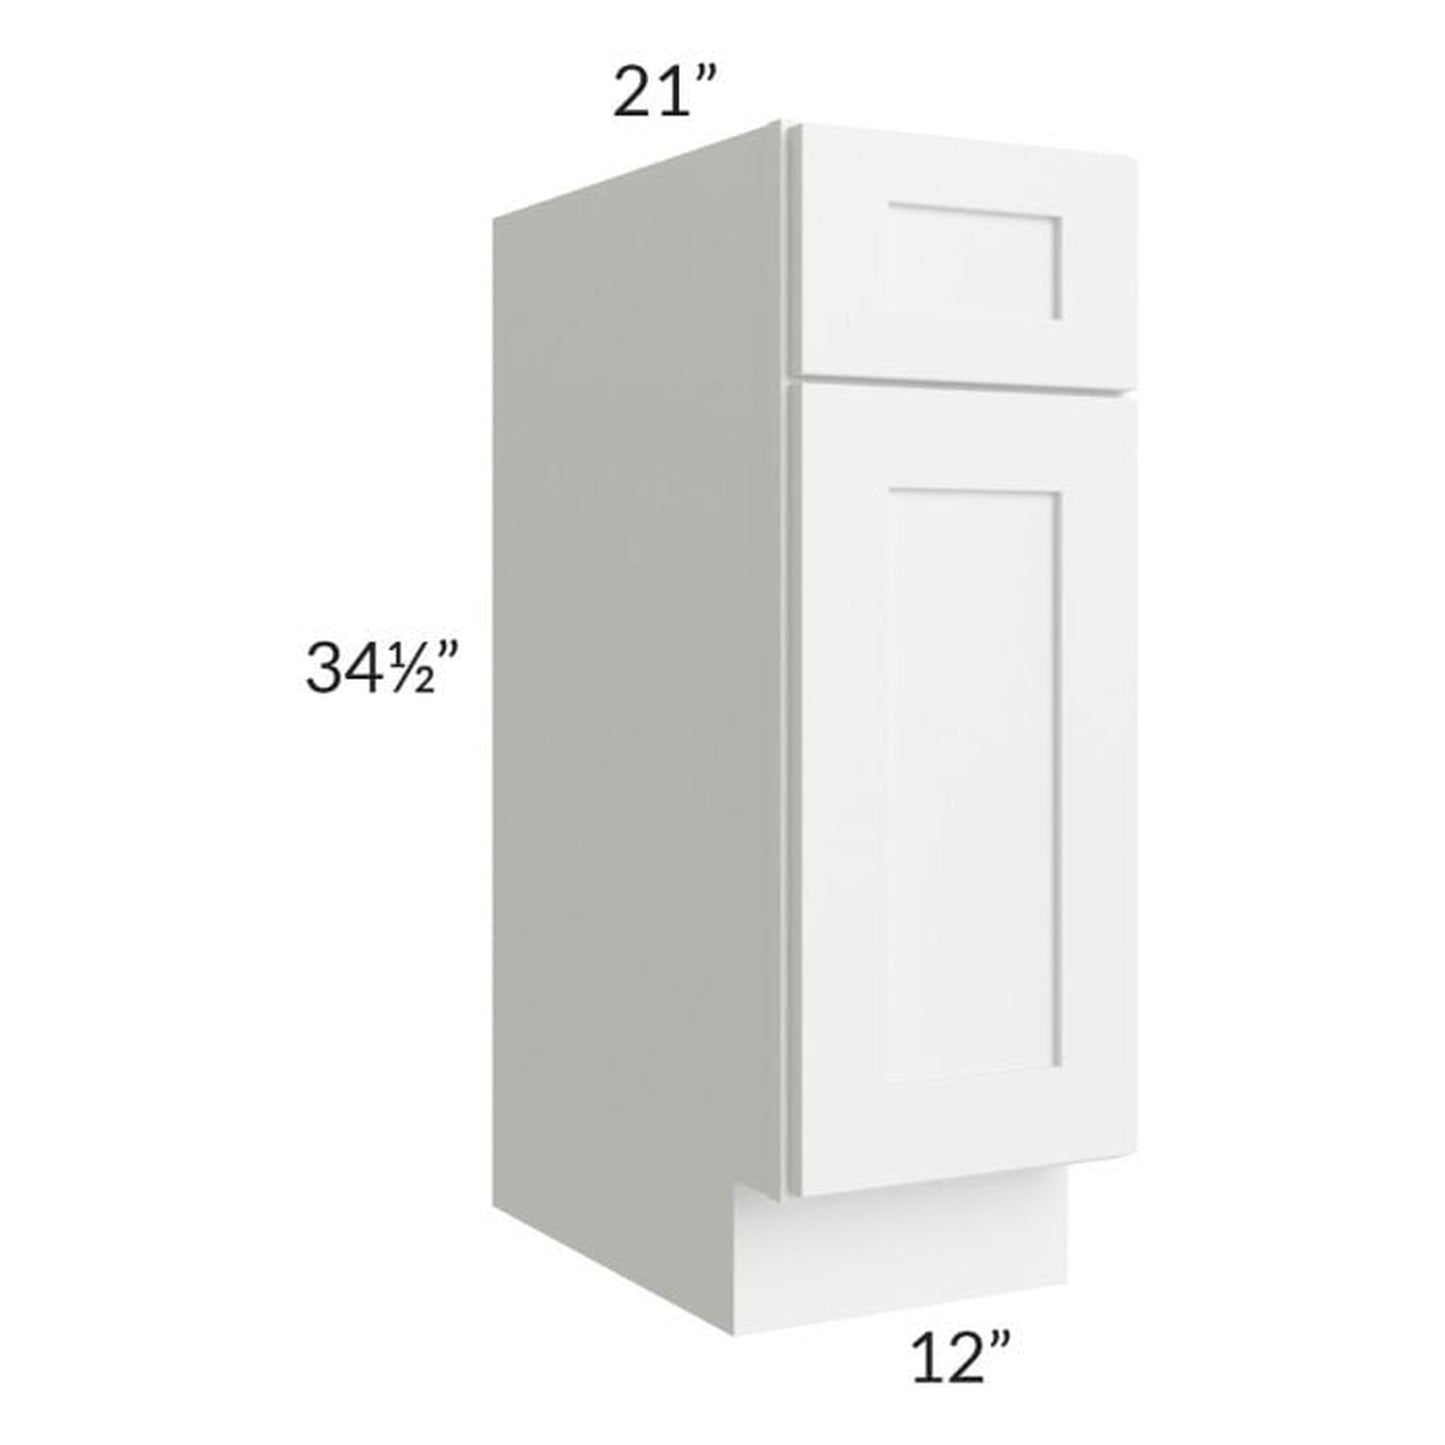 RTA Frosted White Shaker 12" Vanity Base Cabinet with 2 Decorative End Panels